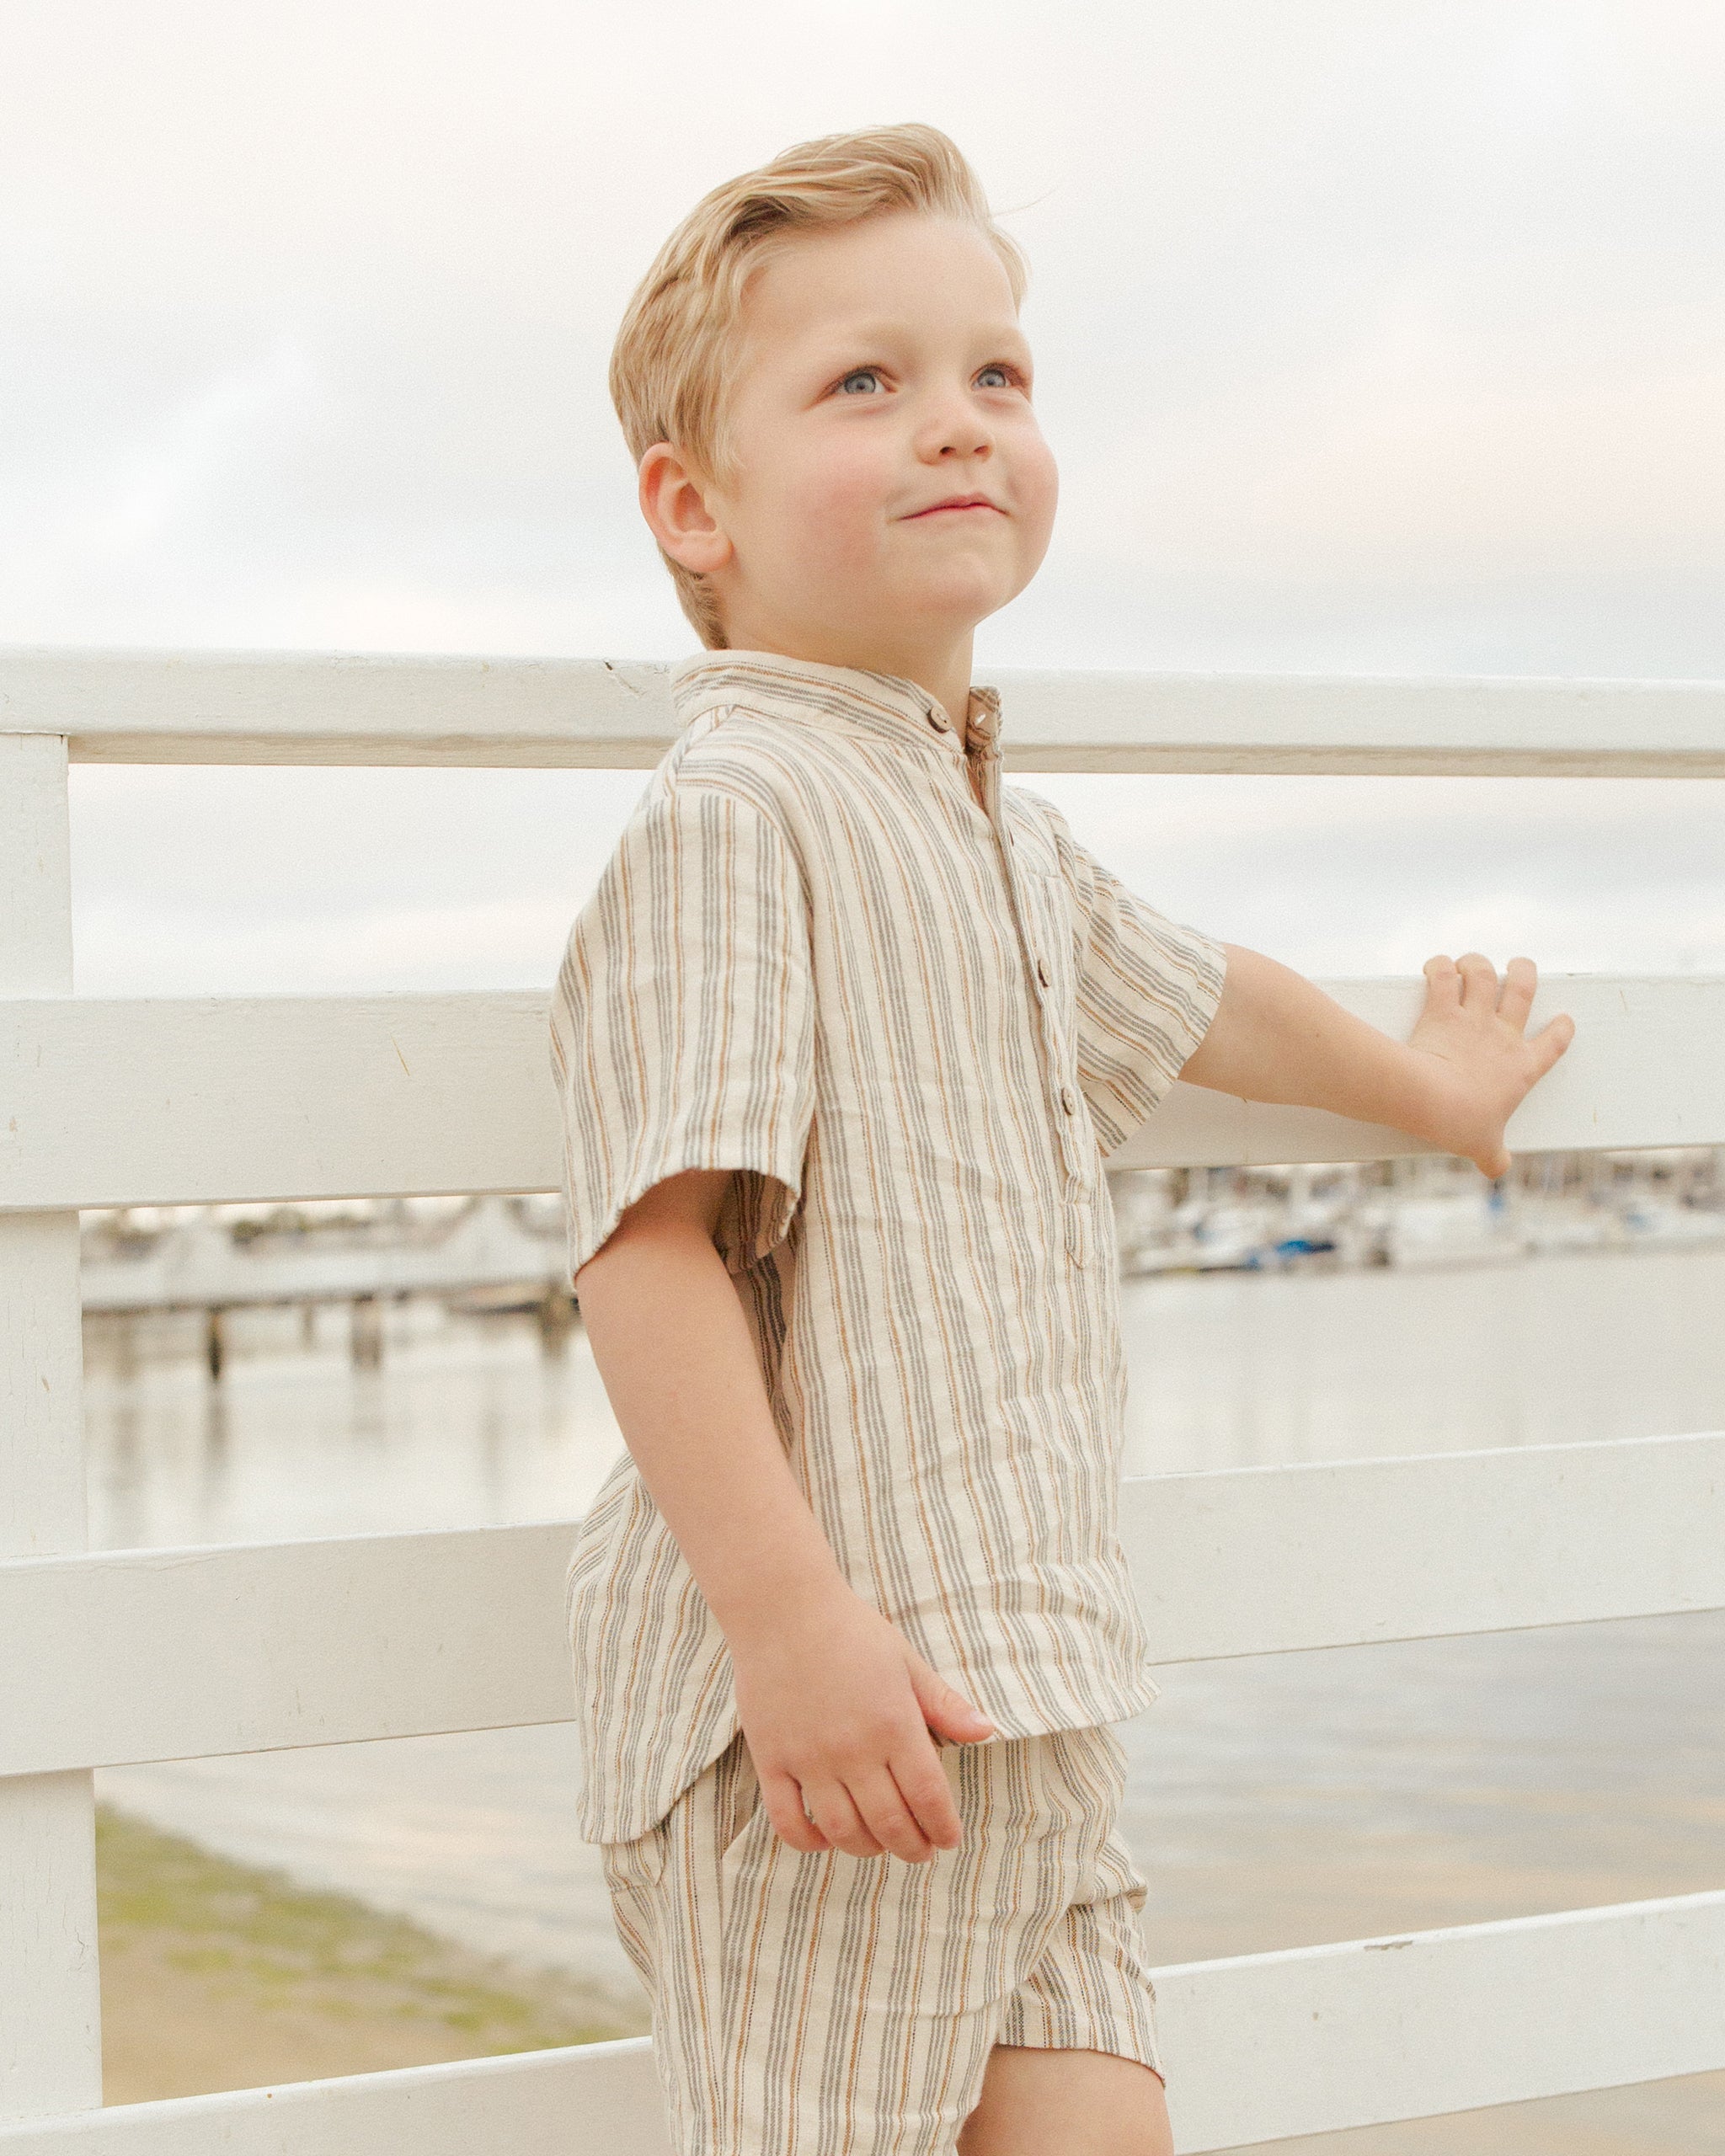 Bermuda Short || Nautical Stripe - Rylee + Cru | Kids Clothes | Trendy Baby Clothes | Modern Infant Outfits |